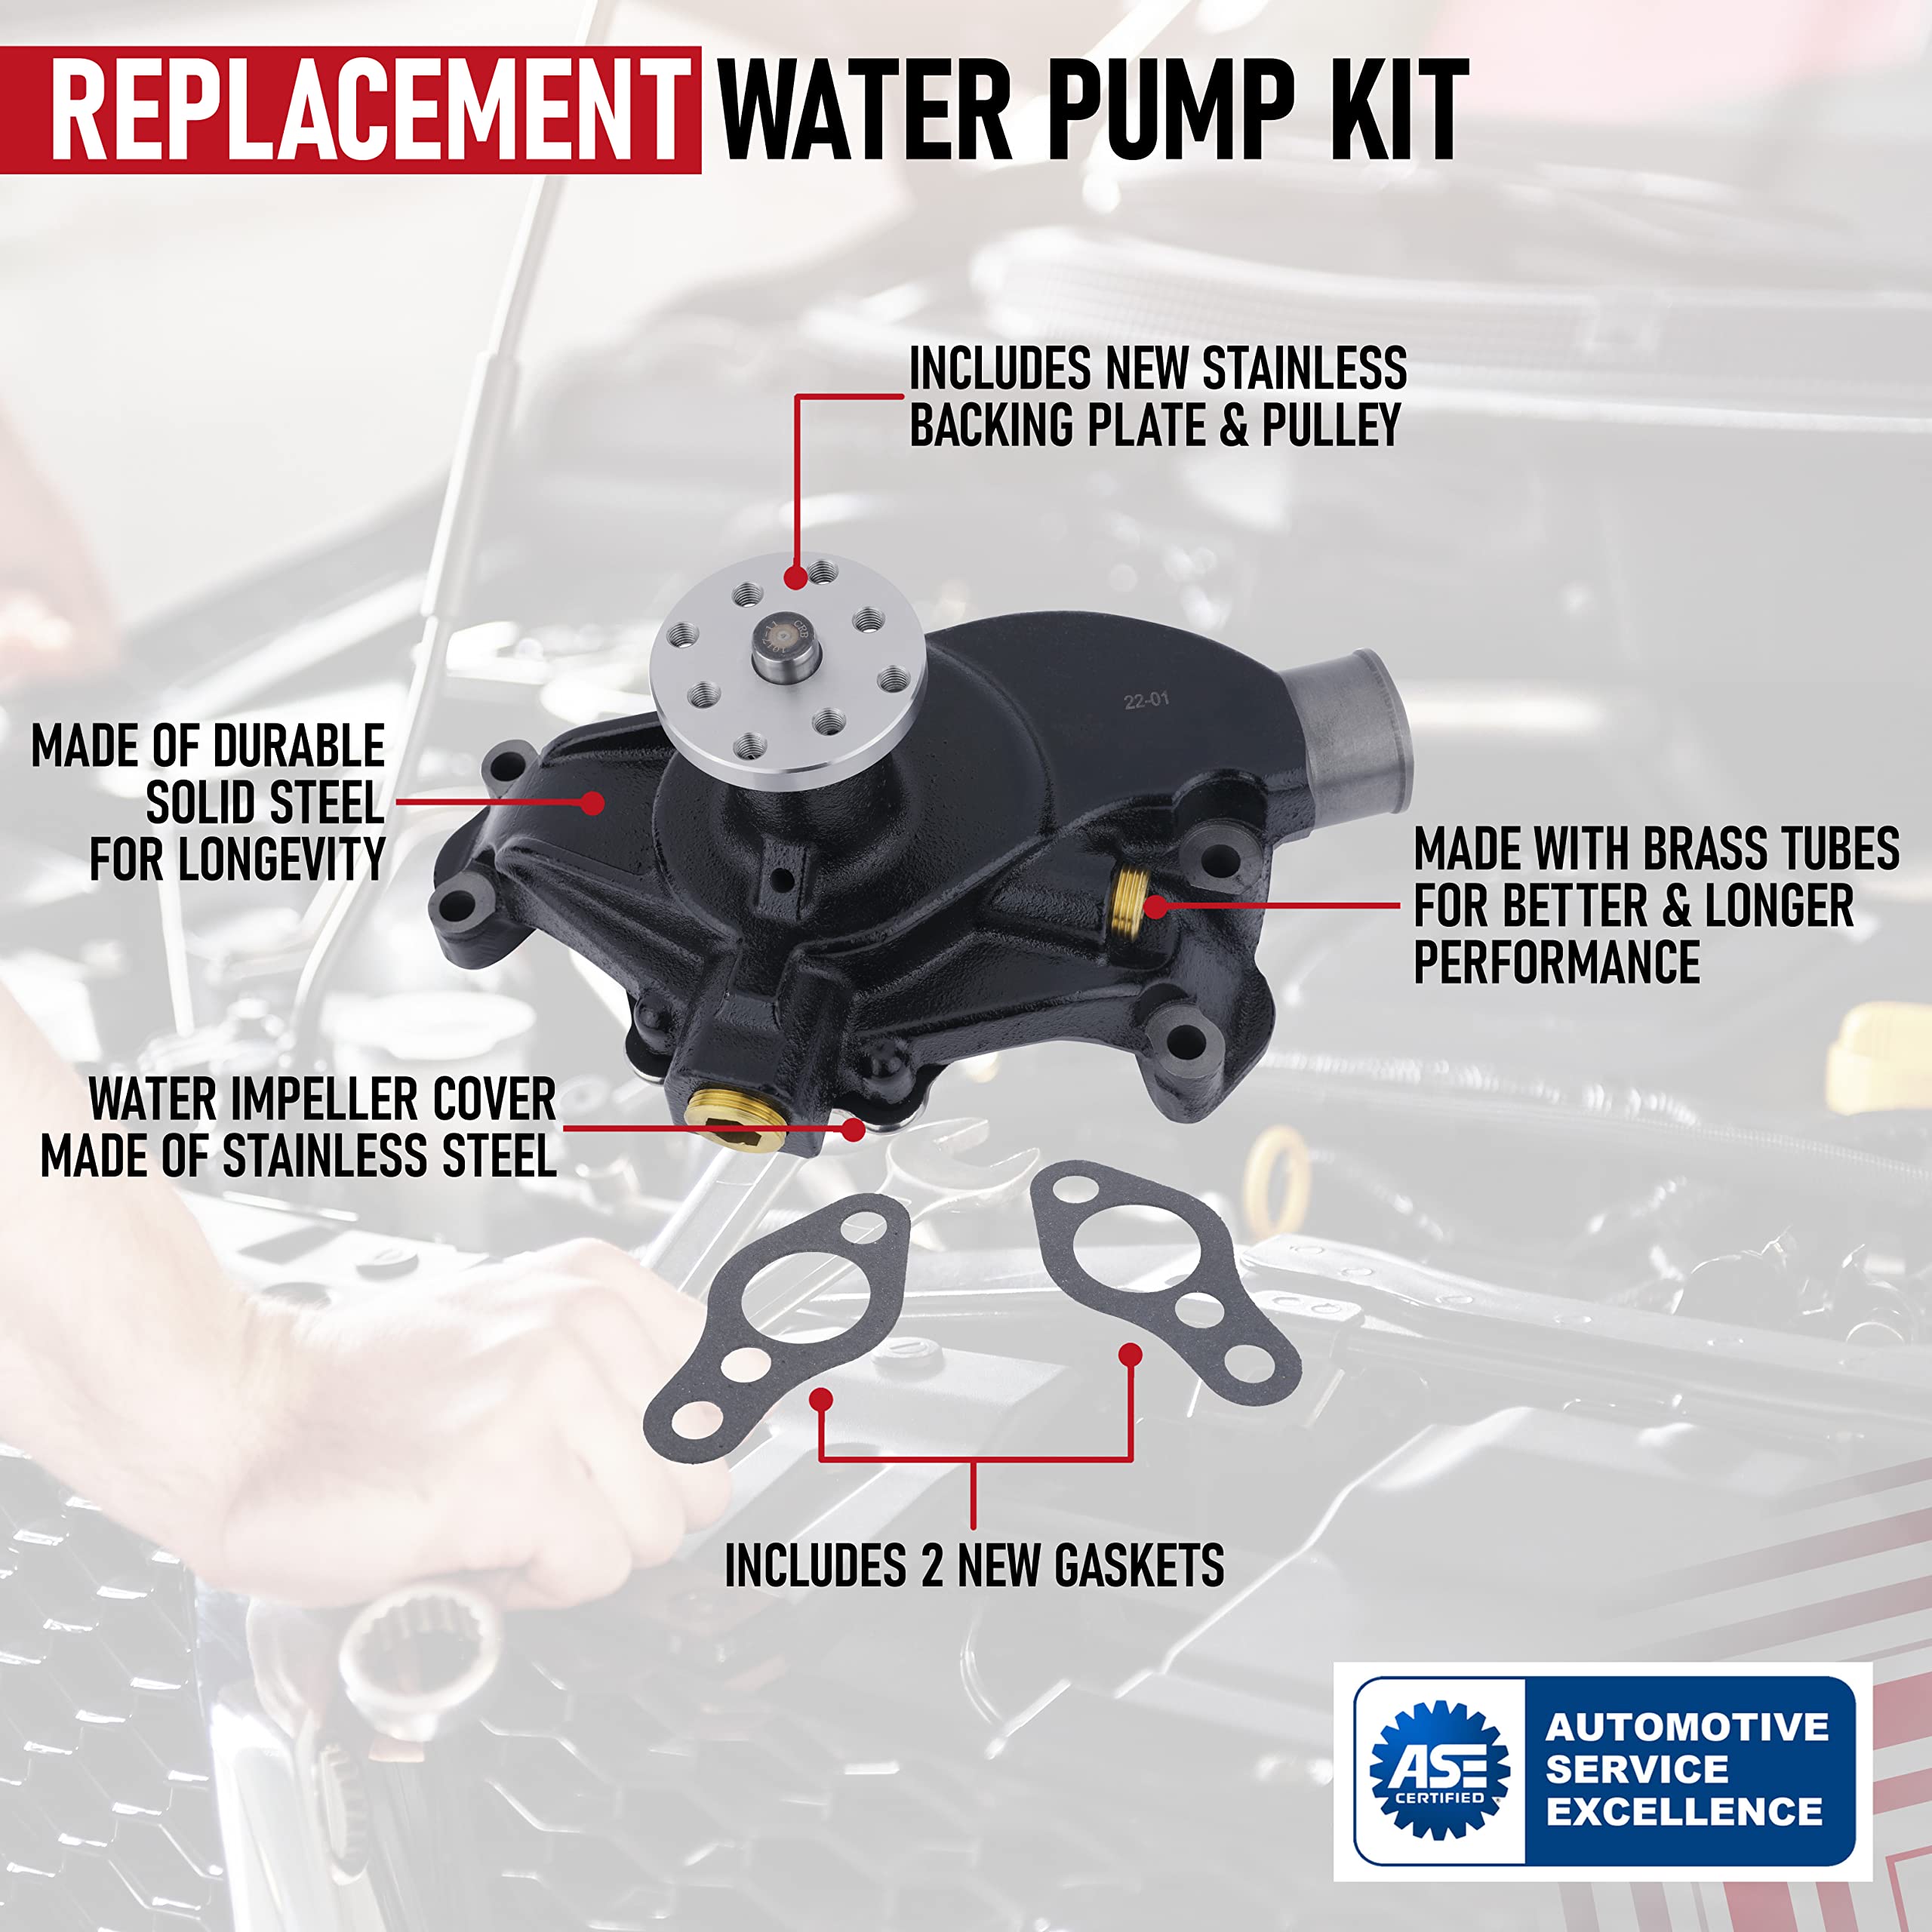 Replacement Water Pump Kit - Compatible with Mercruiser, Stern Drive, Volvo Penta, 1968-1998 OMC, Chrysler and Indmar - Inboard Engines - Replaces 8M0113734, 18-3599-2, 15201, 9-42606, 8503991  - Like New